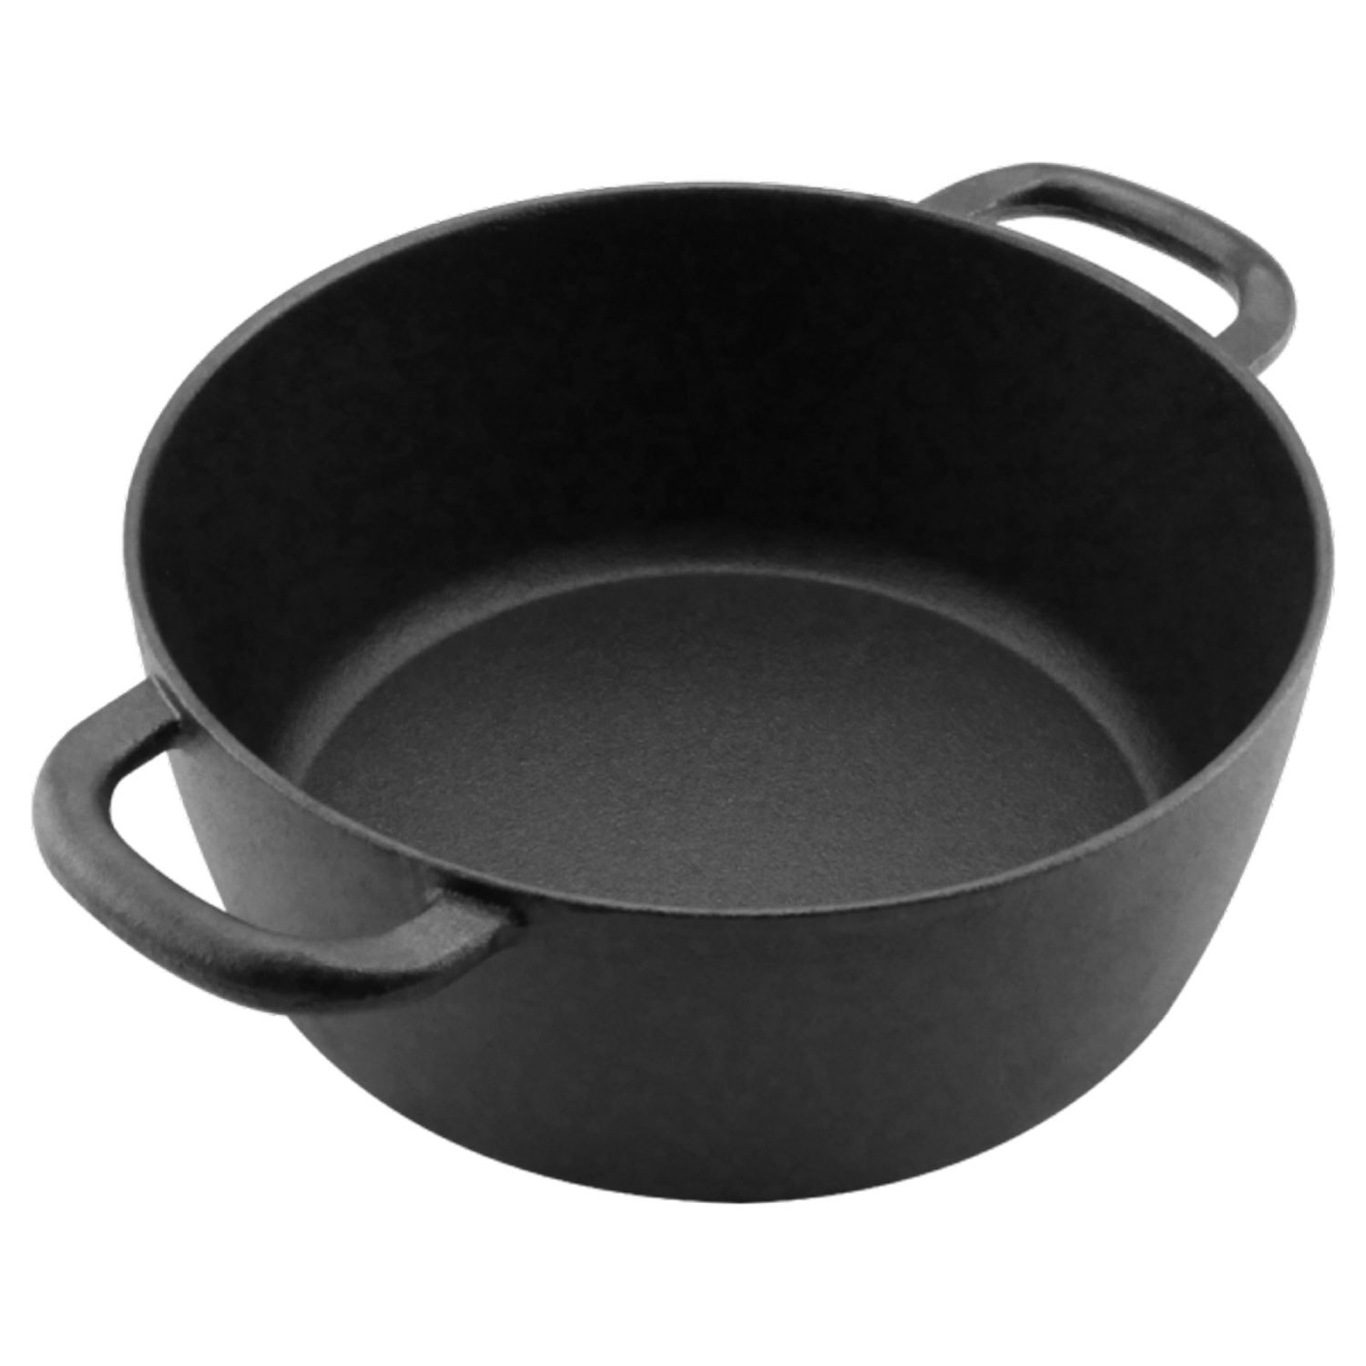 https://royaldesign.com/image/2/carl-victor-cast-iron-pot-with-glass-lid-8?w=800&quality=80